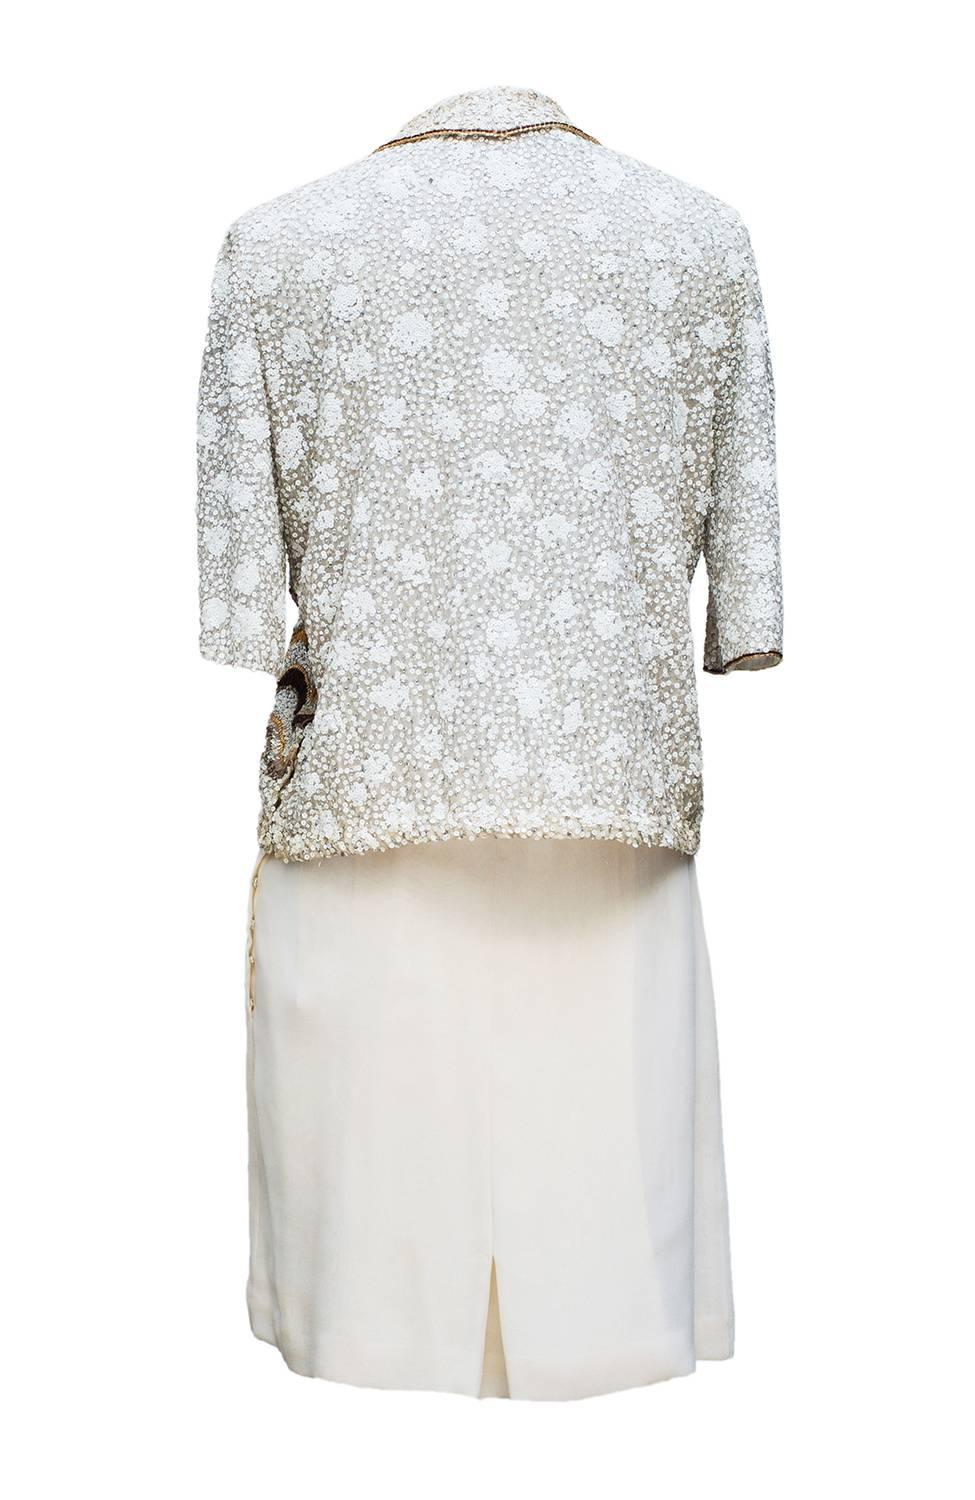 Chirstian Dior Paris, Spring/Summer Collection 1986 Haute Couture, Sequined, Top For Sale 3